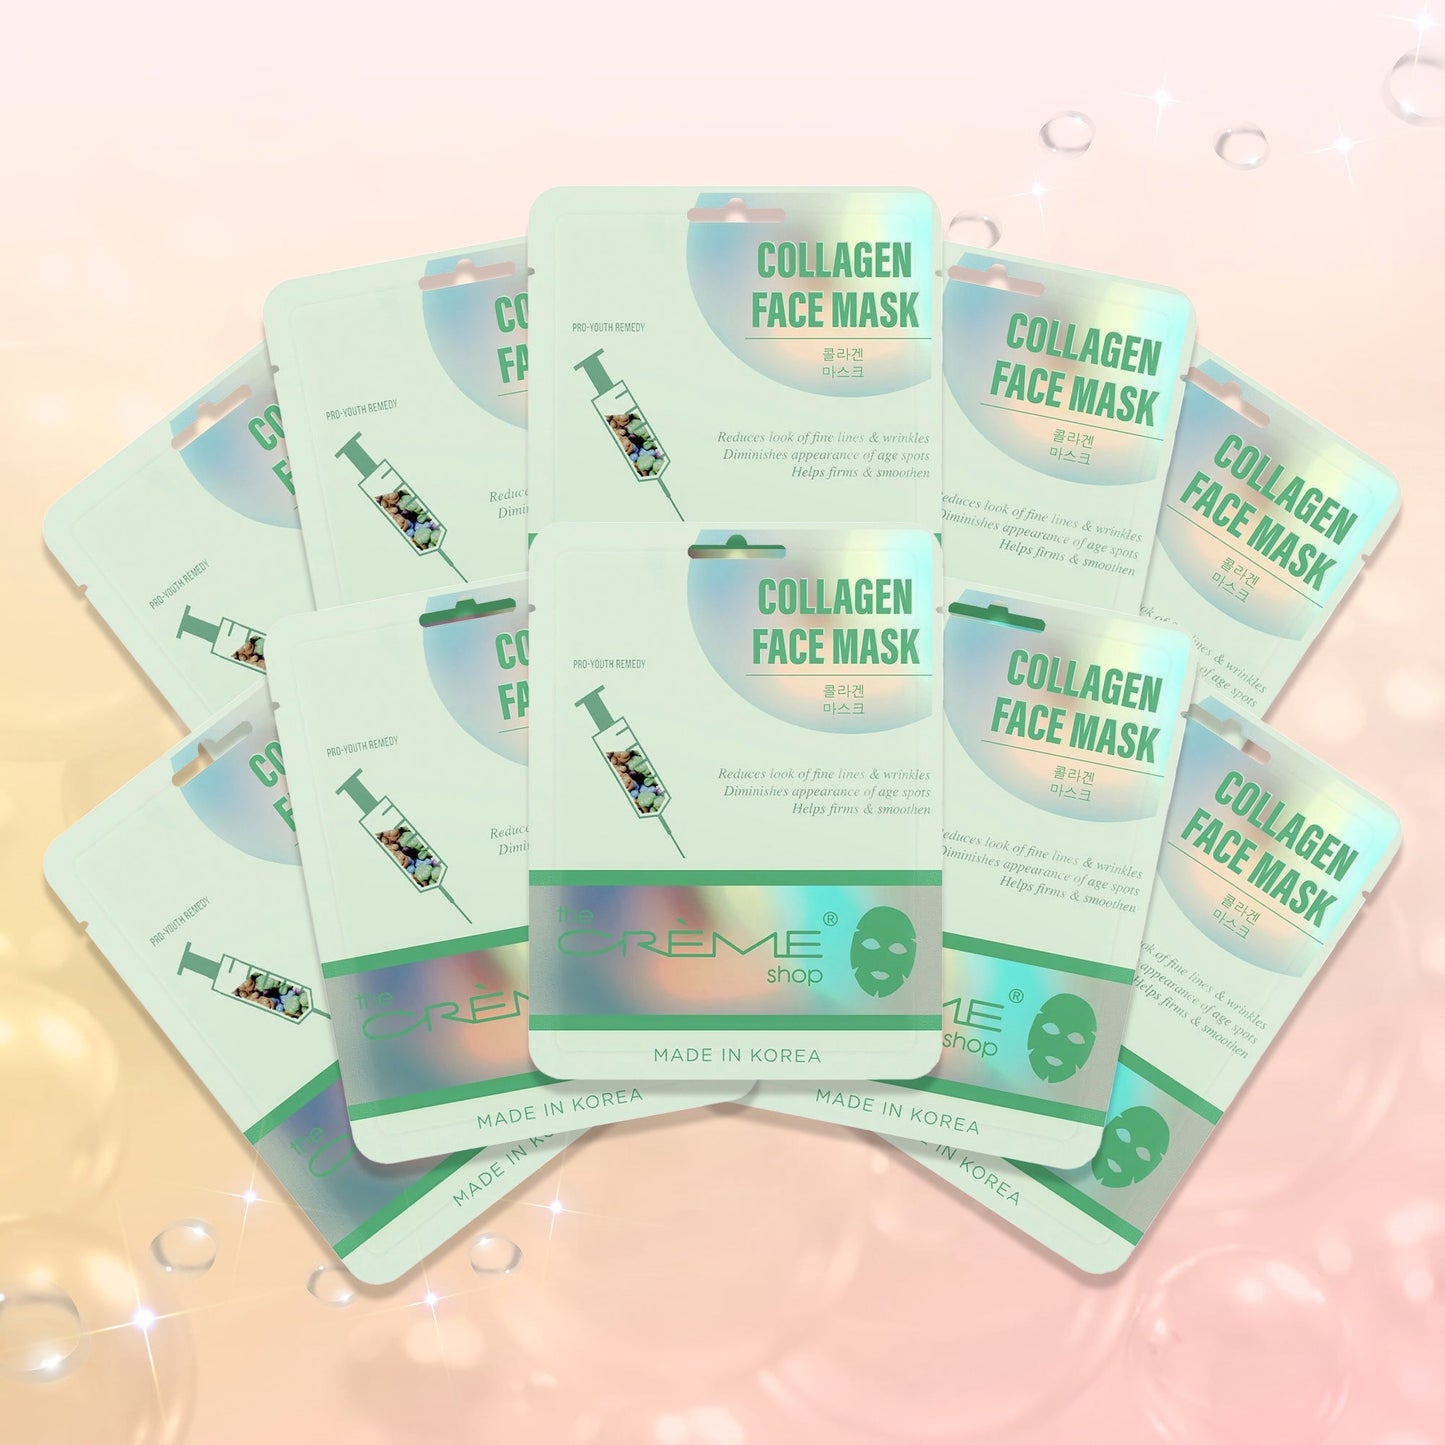 Collagen Face Mask - Pro Youth Remedy Sheet masks - The Crème Shop 